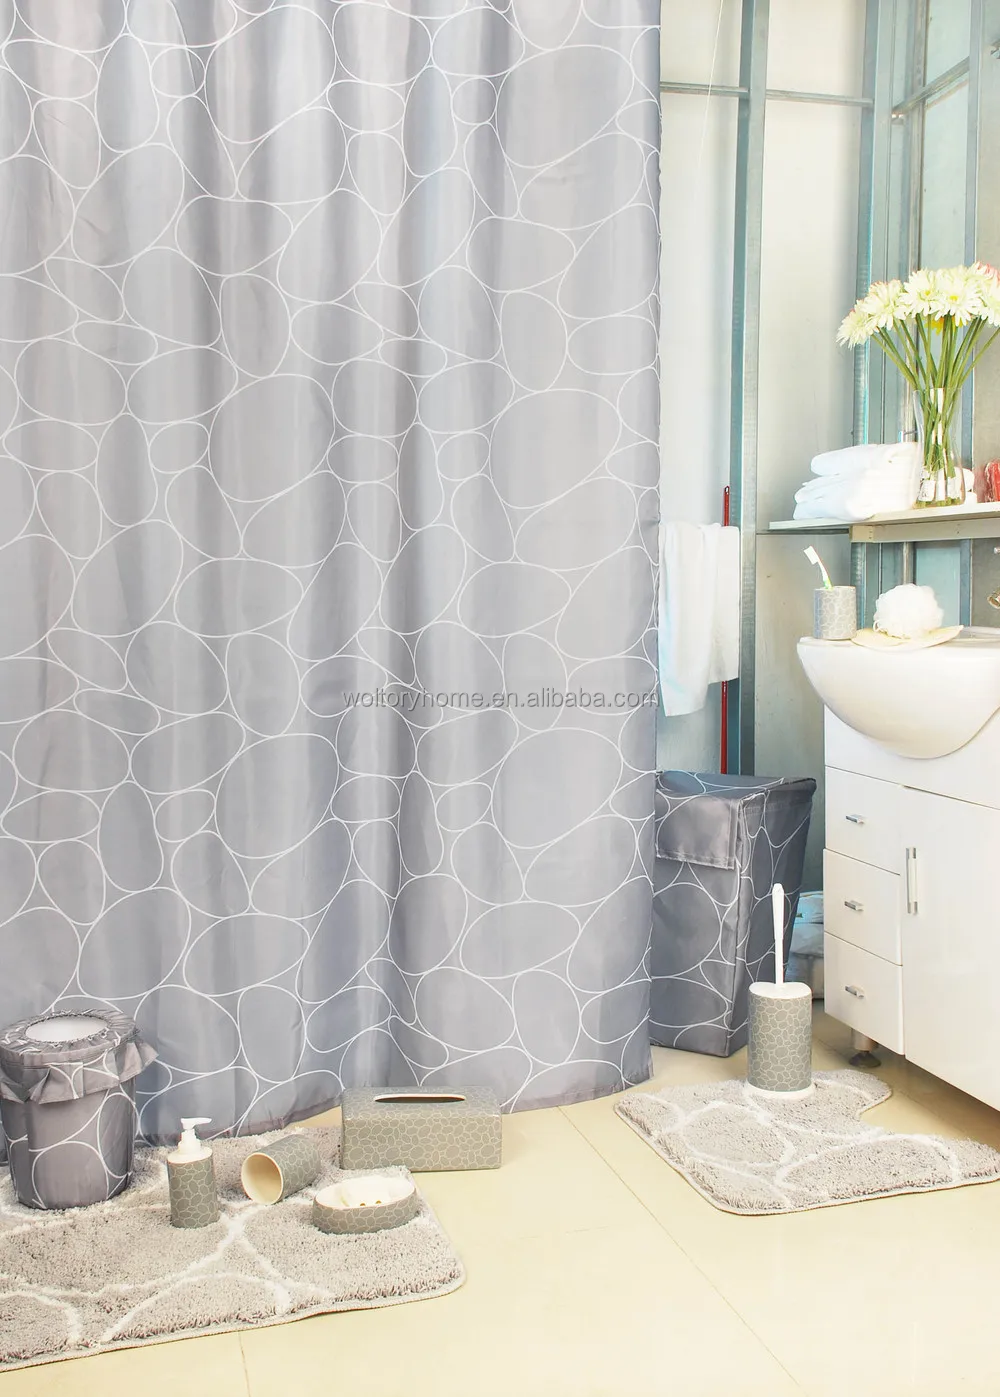 Pebble Stone Shower Curtain With Bath Mat Set And Match Ceramic